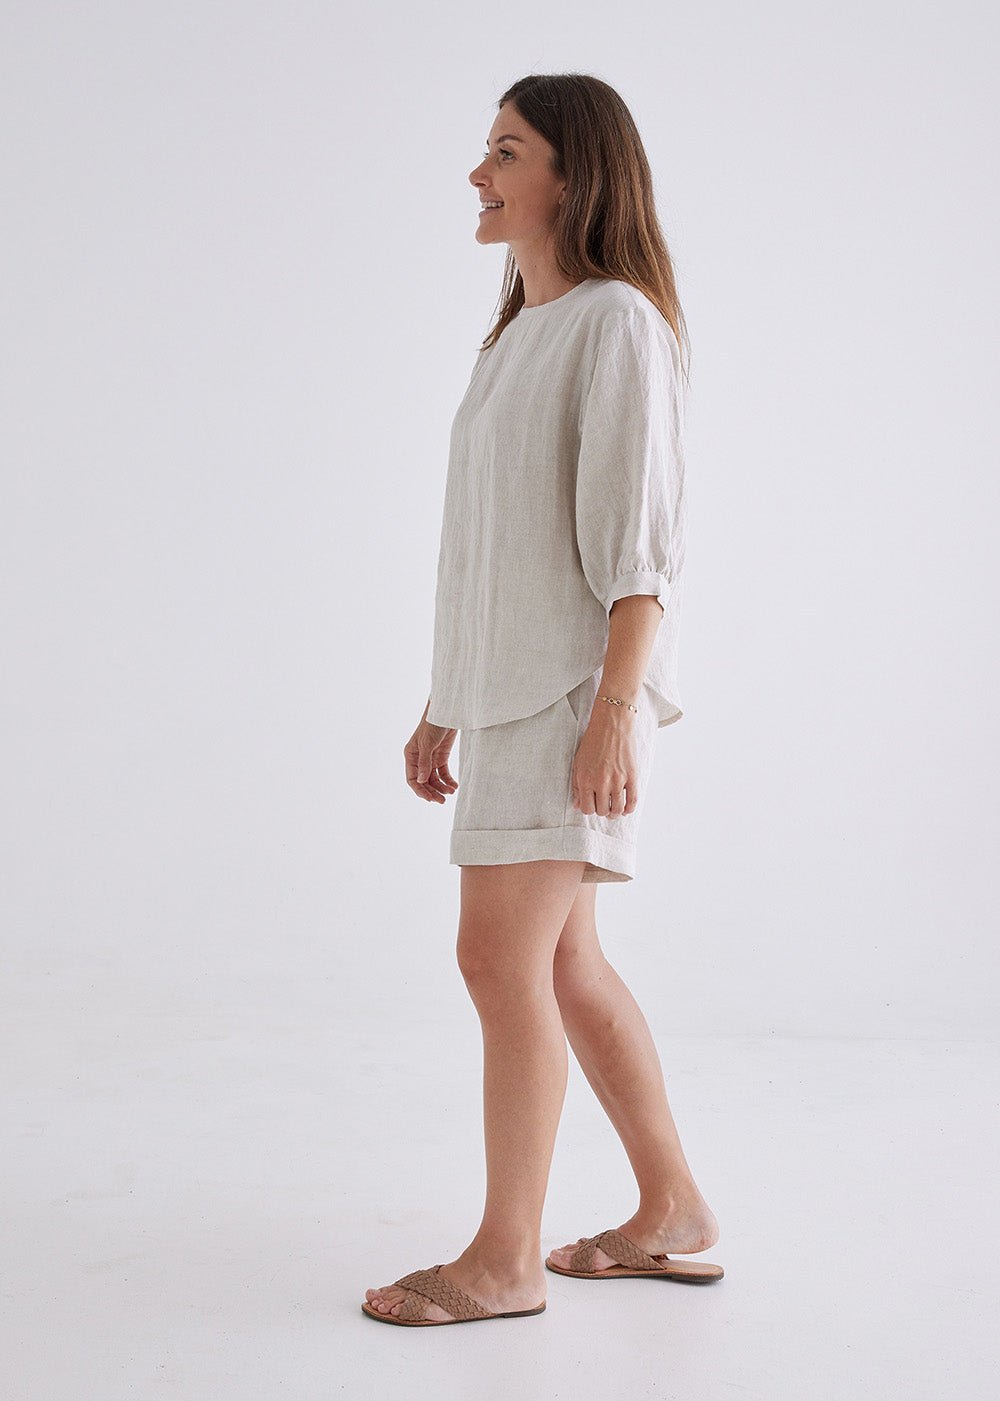 Laura Linen Top in Natural-Devina Louise-stride